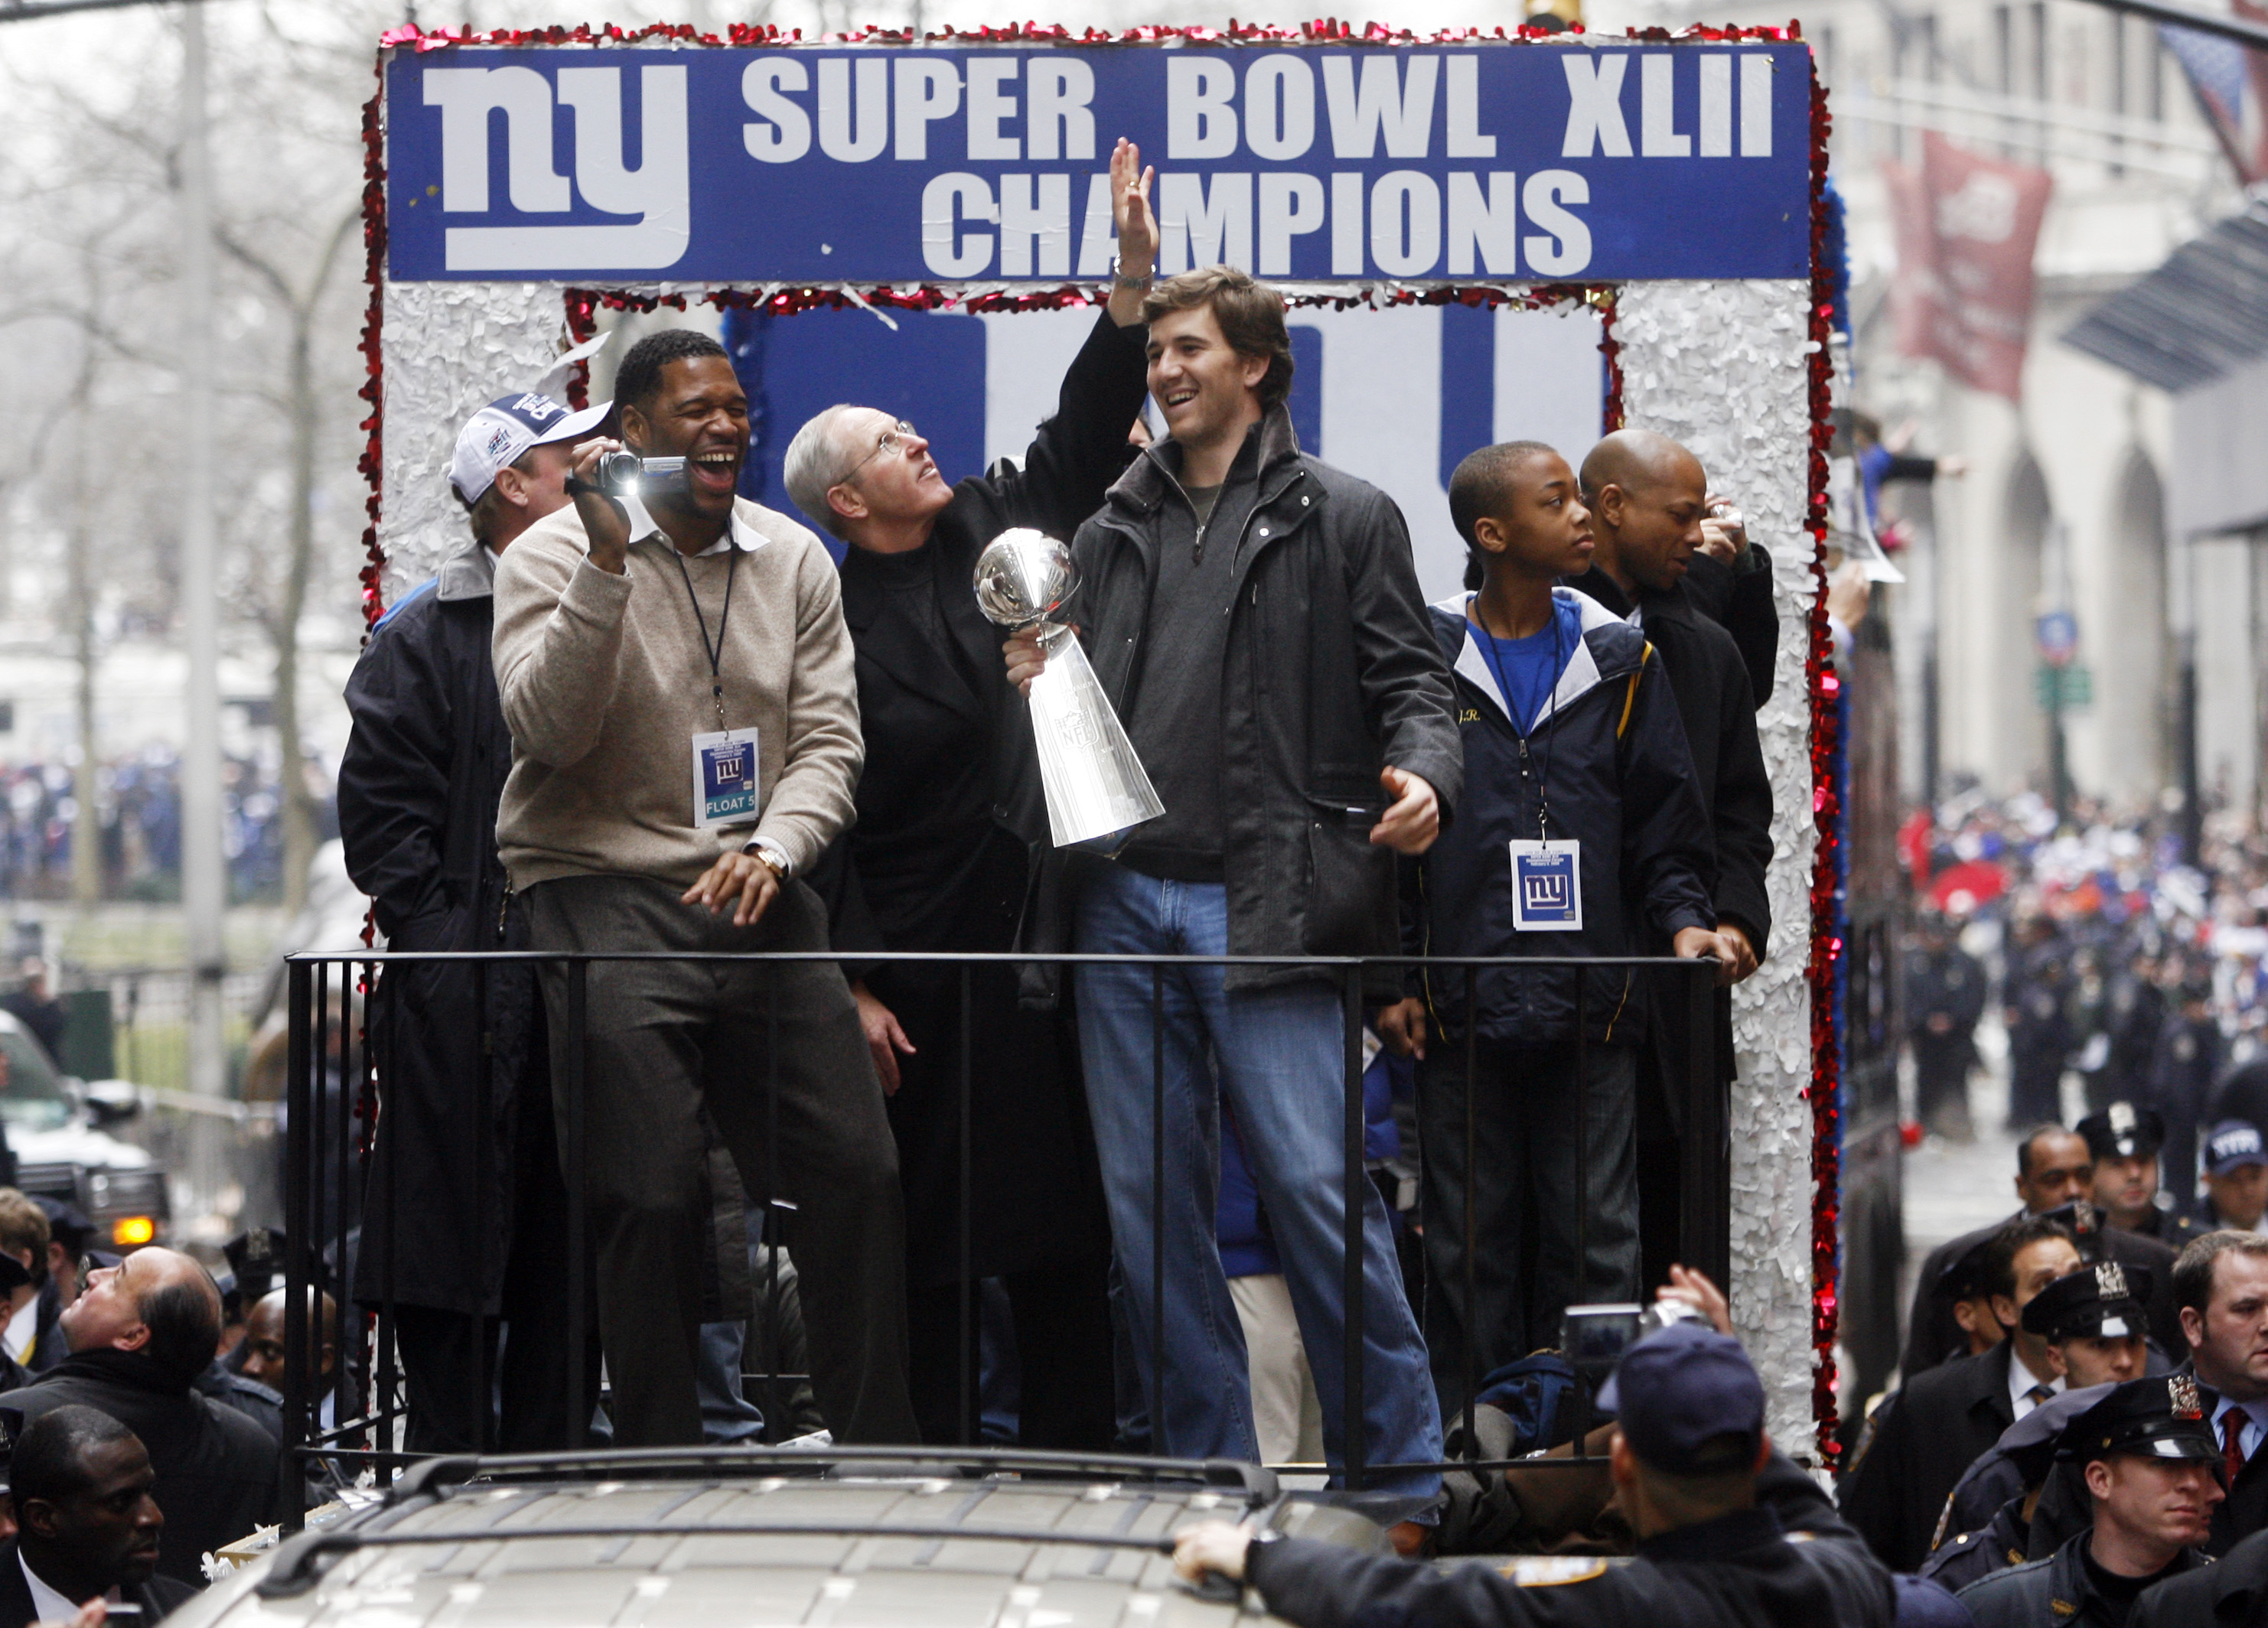 Michael Strahan (left) Coach Tom Coughlin, Eli Manning, Jerry Reese II and his father, Giants GM Jerry Reese celebrate with the Vince Lombardi Trophy as New York City celebrates the New York Giants win in Super Bowl XLII with a ticker tape parade up Broadway.  MANHATTAN, NYC (2008 file photo by Andrew Mills | The Star-Ledger)